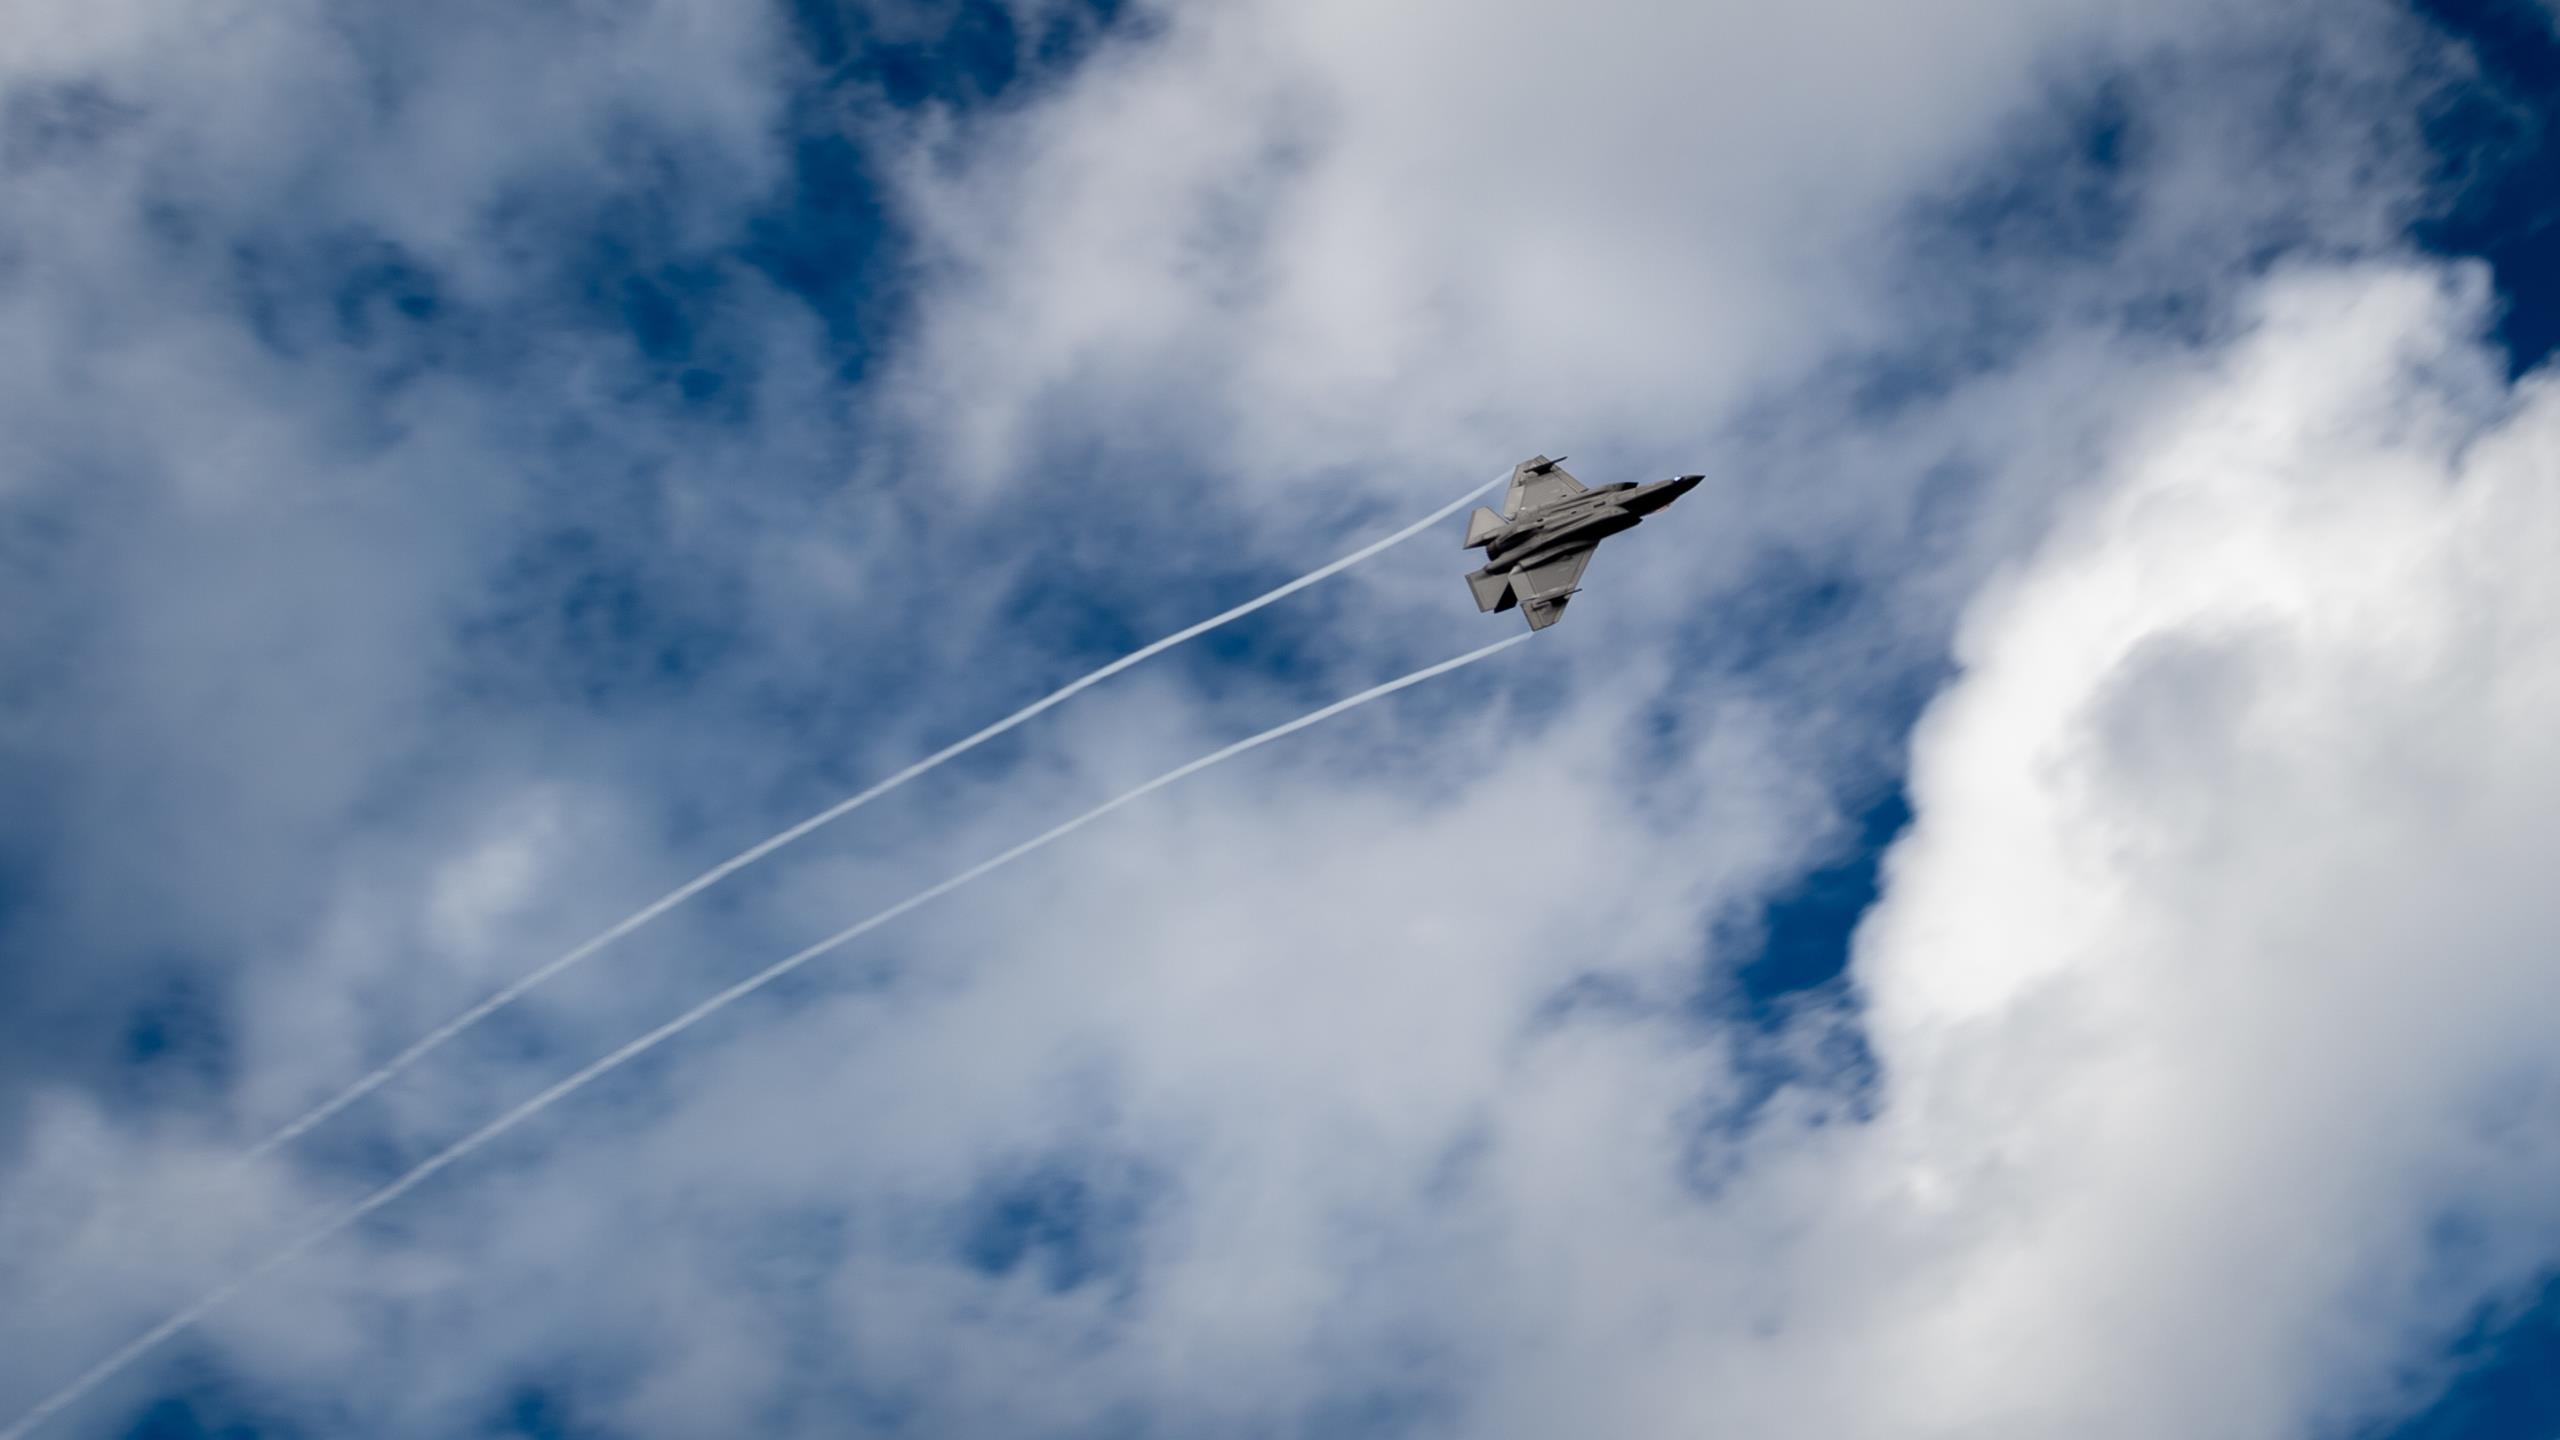 PHILIPPINE SEA (Nov. 30, 2021) An F-35C Lightning II, assigned to the “Argonauts” of Strike Fighter Squadron (VFA) 147, performs a fly by over the flight deck of the Nimitz-class aircraft carrier USS Carl Vinson (CVN 70) during Annual Exercise (ANNUALEX) 2021, Nov. 30, 2021. 